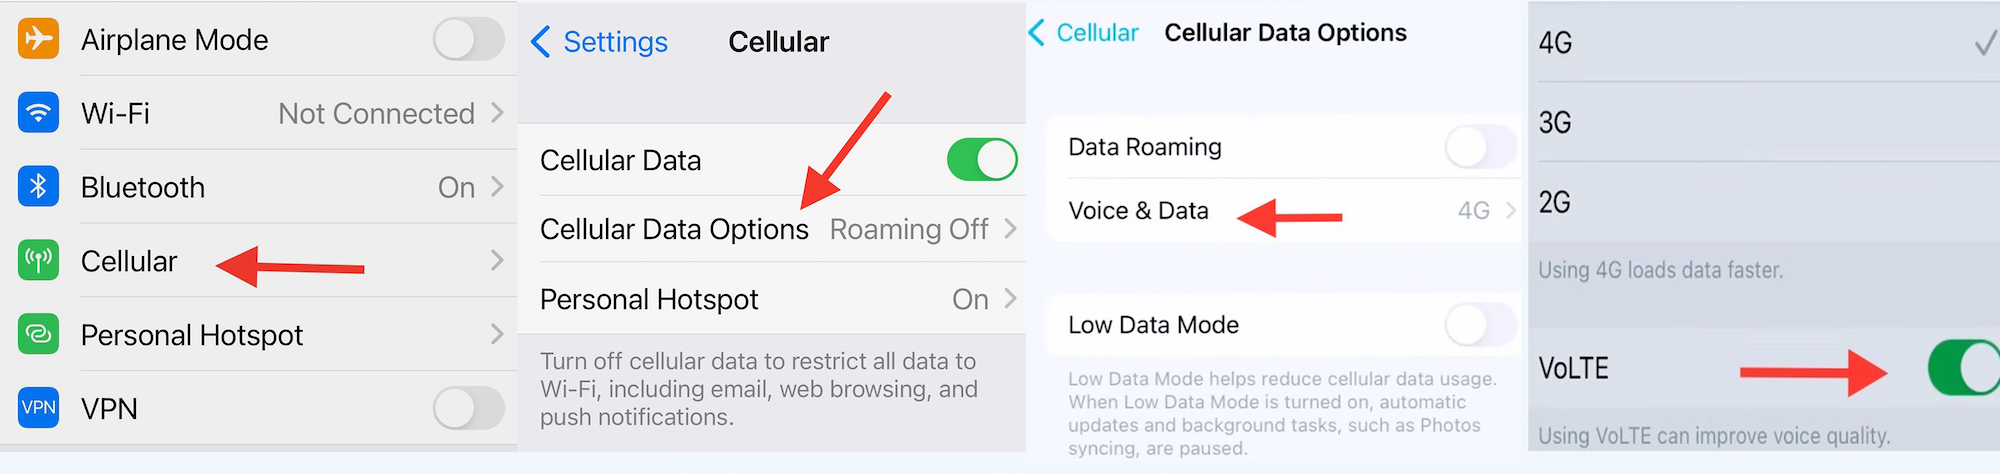 enable volte iphone